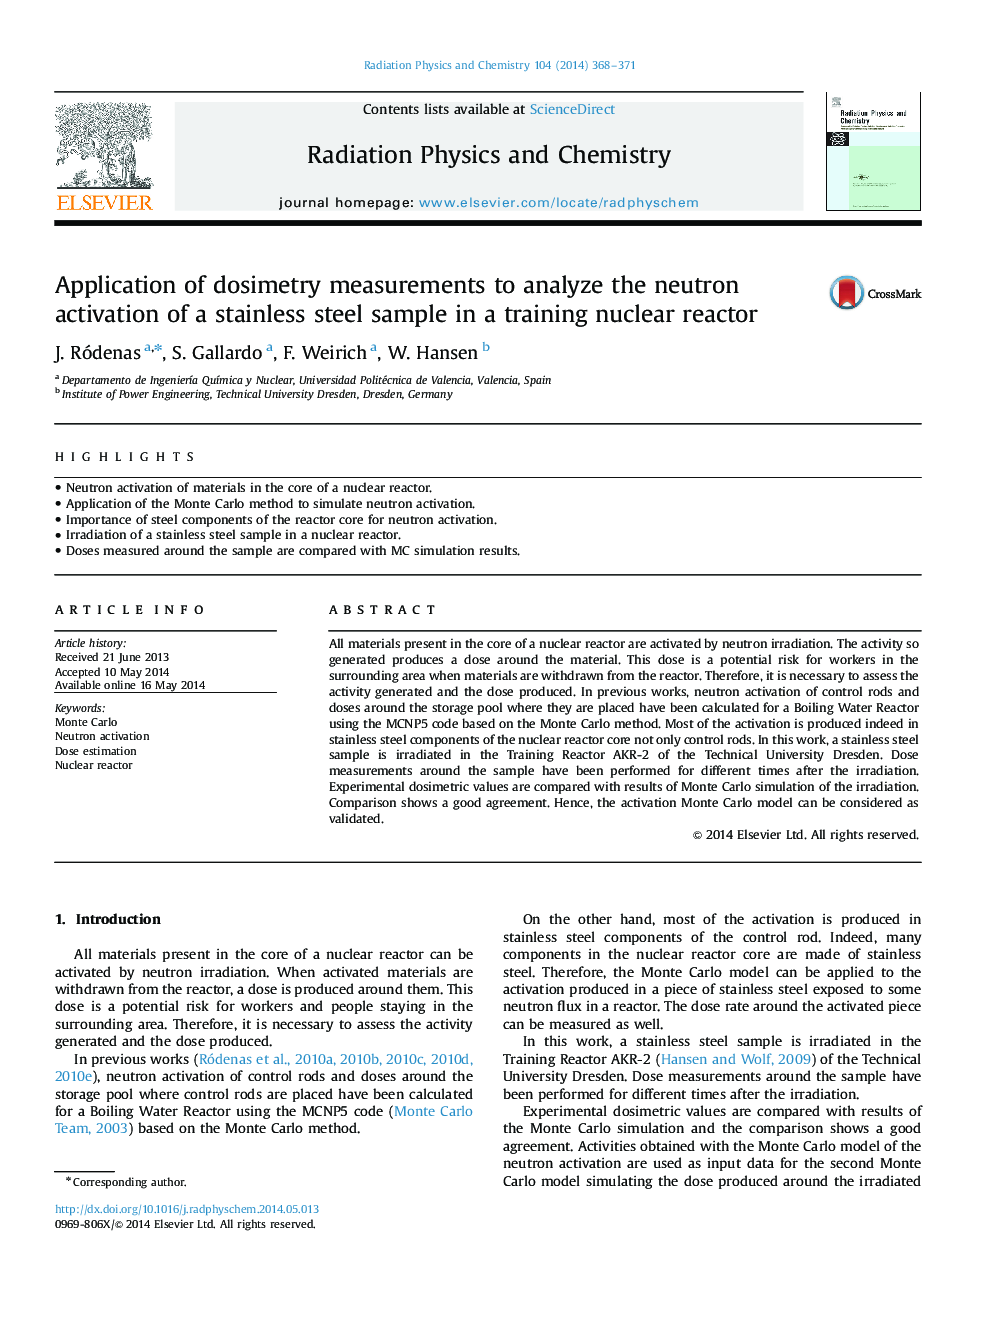 Application of dosimetry measurements to analyze the neutron activation of a stainless steel sample in a training nuclear reactor